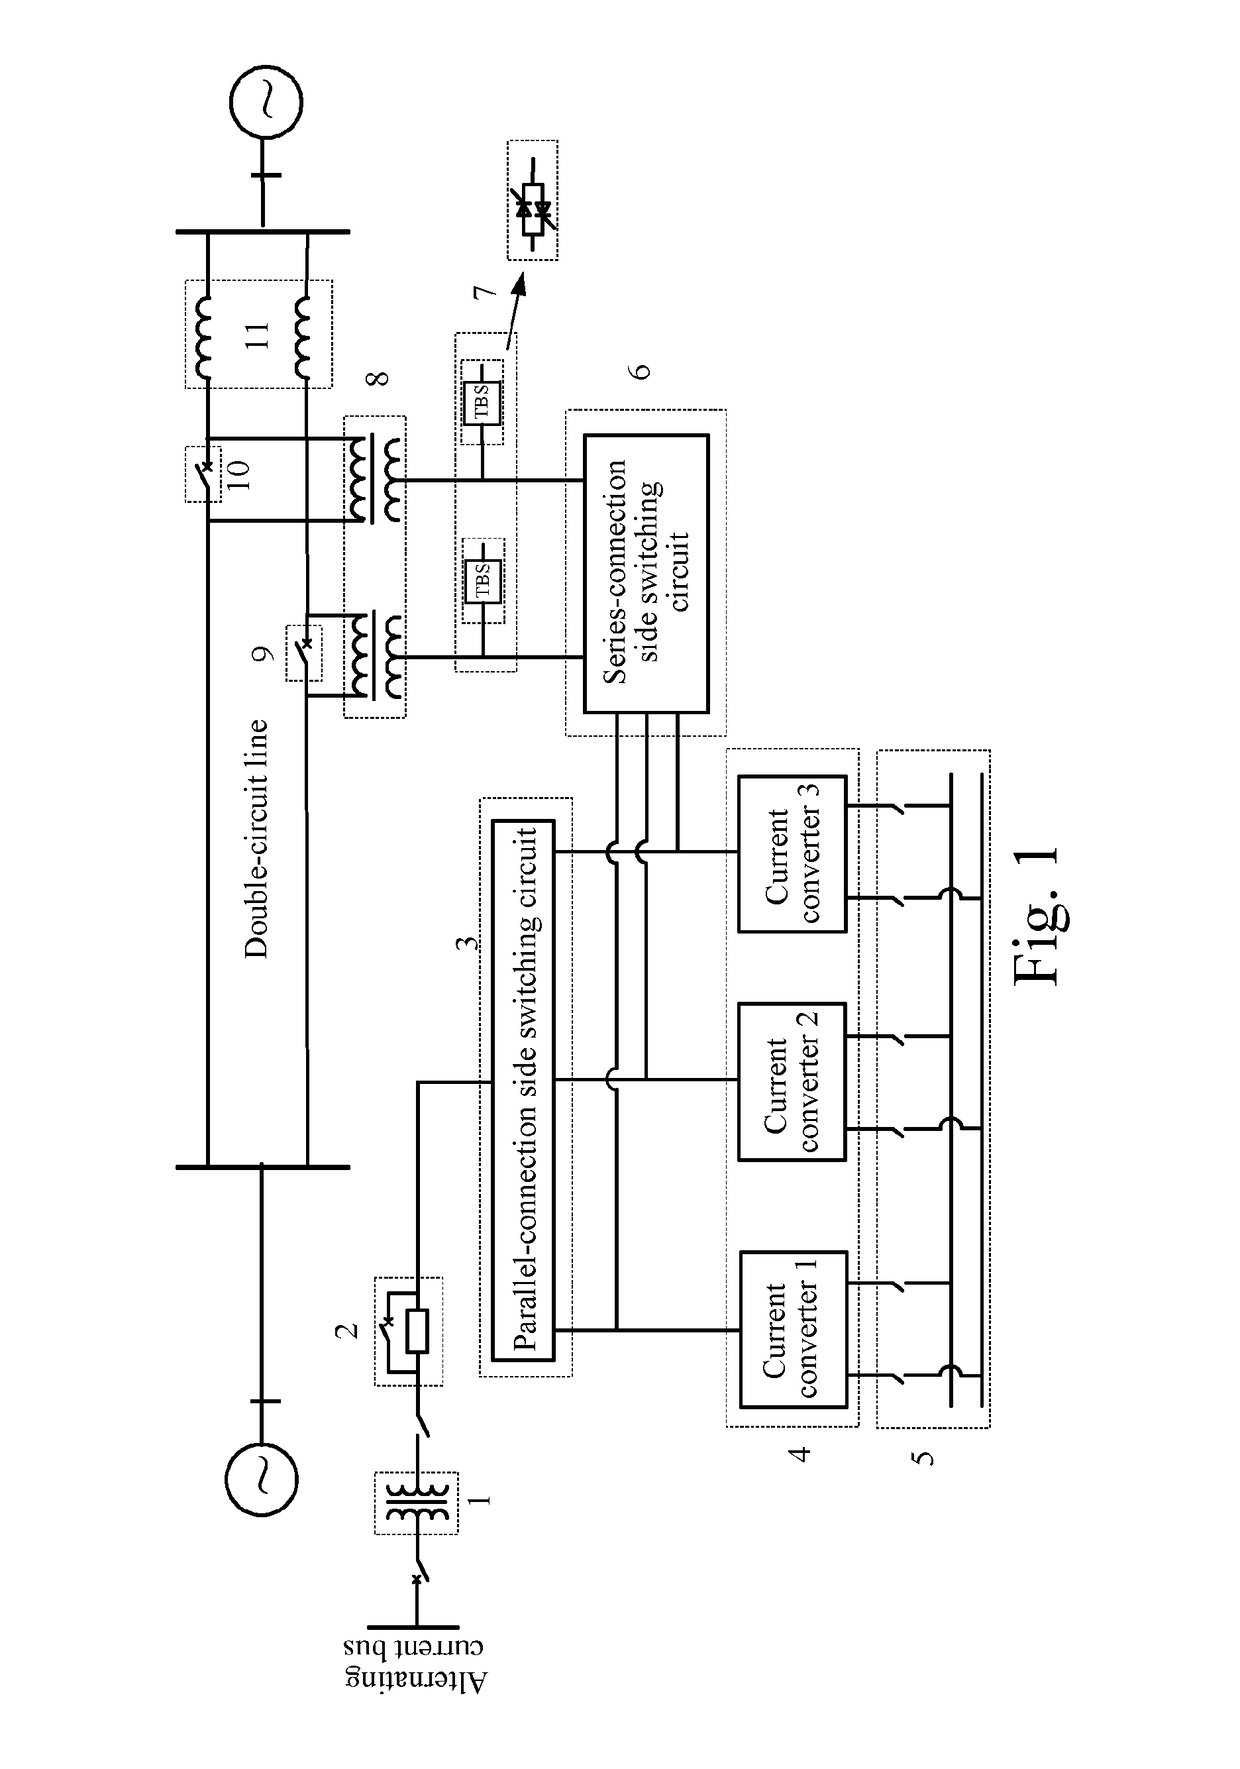 Unified power flow controller for double-circuit line